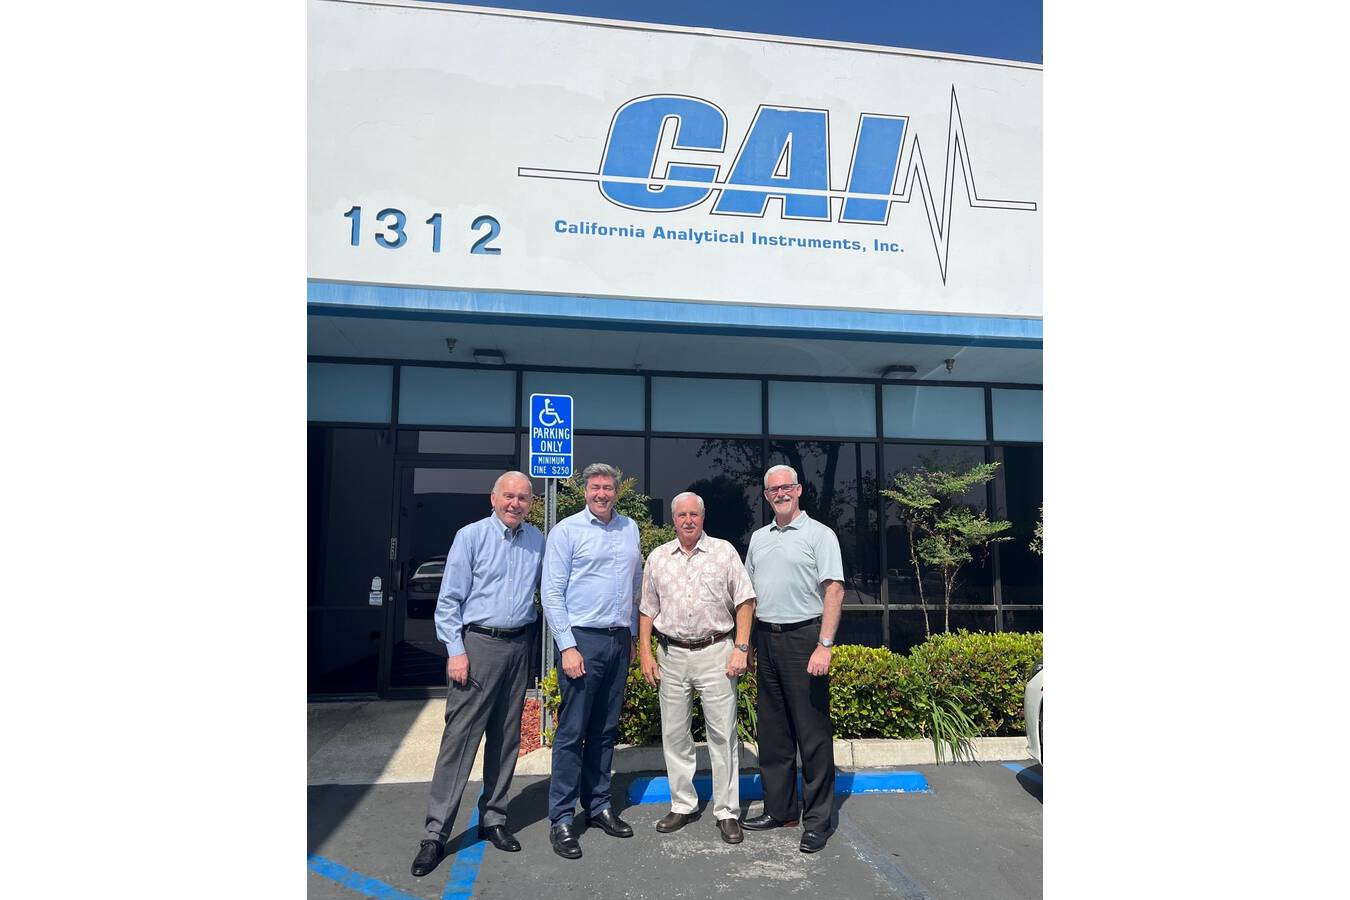 ENVEA Acquires California Analytical Instruments ENVEA, comprised of ENVEA Global SAS and its subsidiary businesses, today announces it has acquired California Analytical Instruments, Inc. (“CAI”). The financial terms of the transaction were not disclosed.